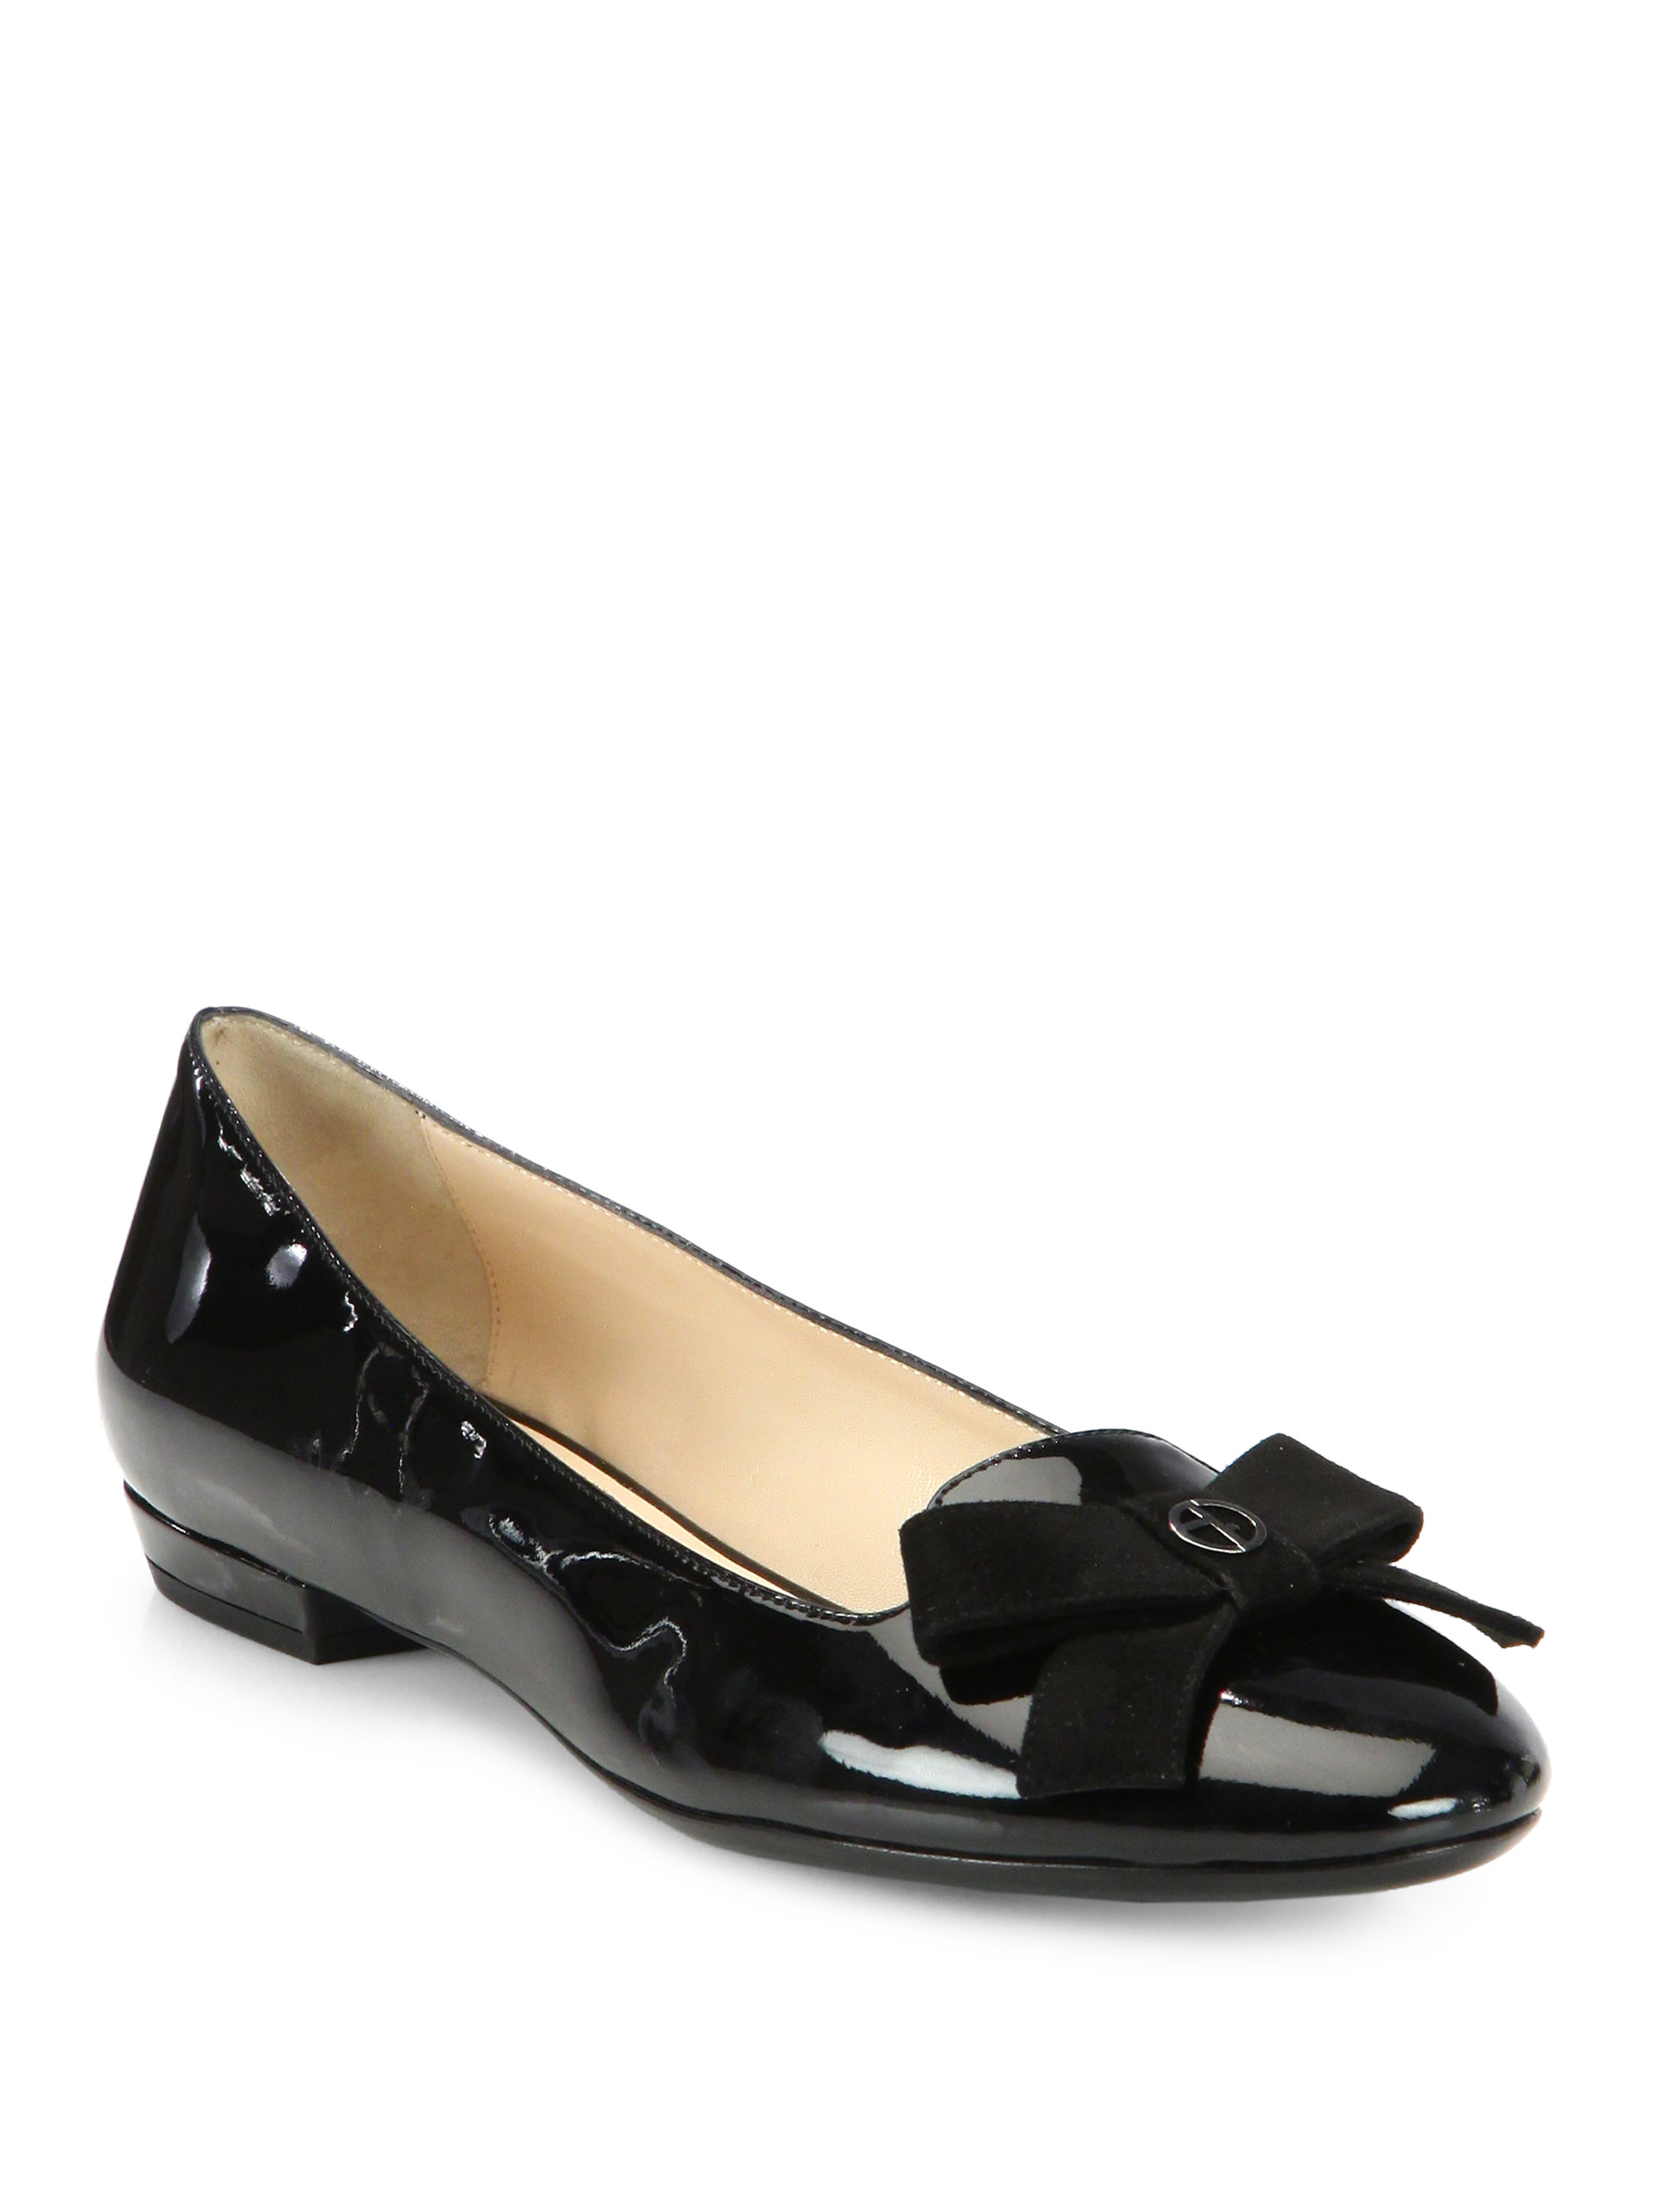 Lyst - Giorgio Armani Patent Leather Suede Bow Smoking Slippers in Black